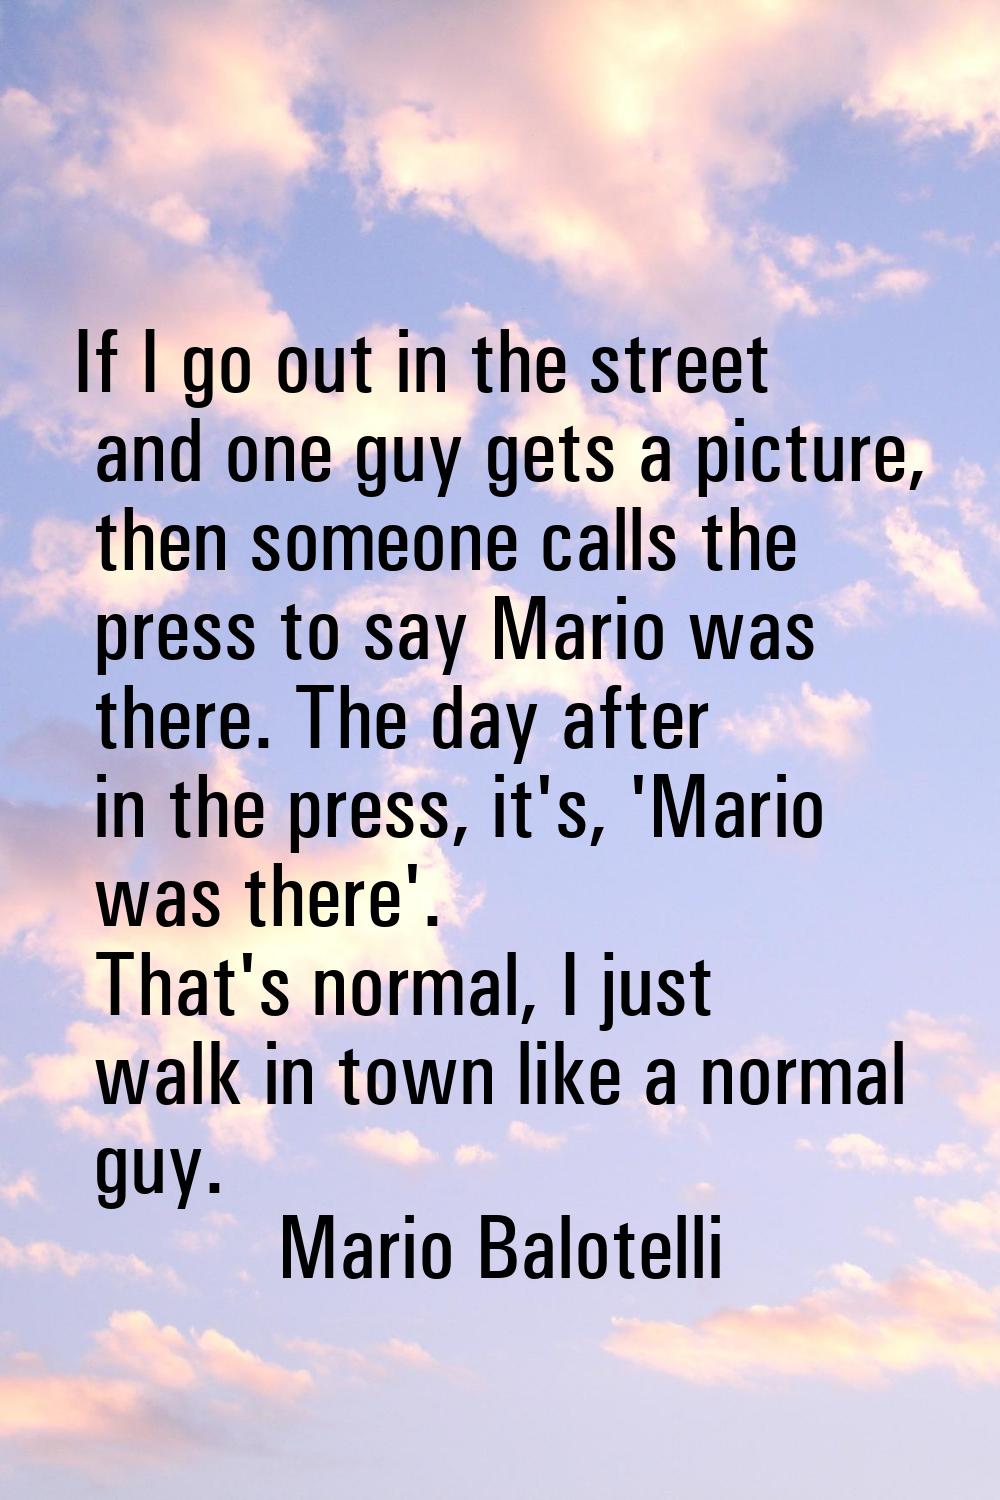 If I go out in the street and one guy gets a picture, then someone calls the press to say Mario was